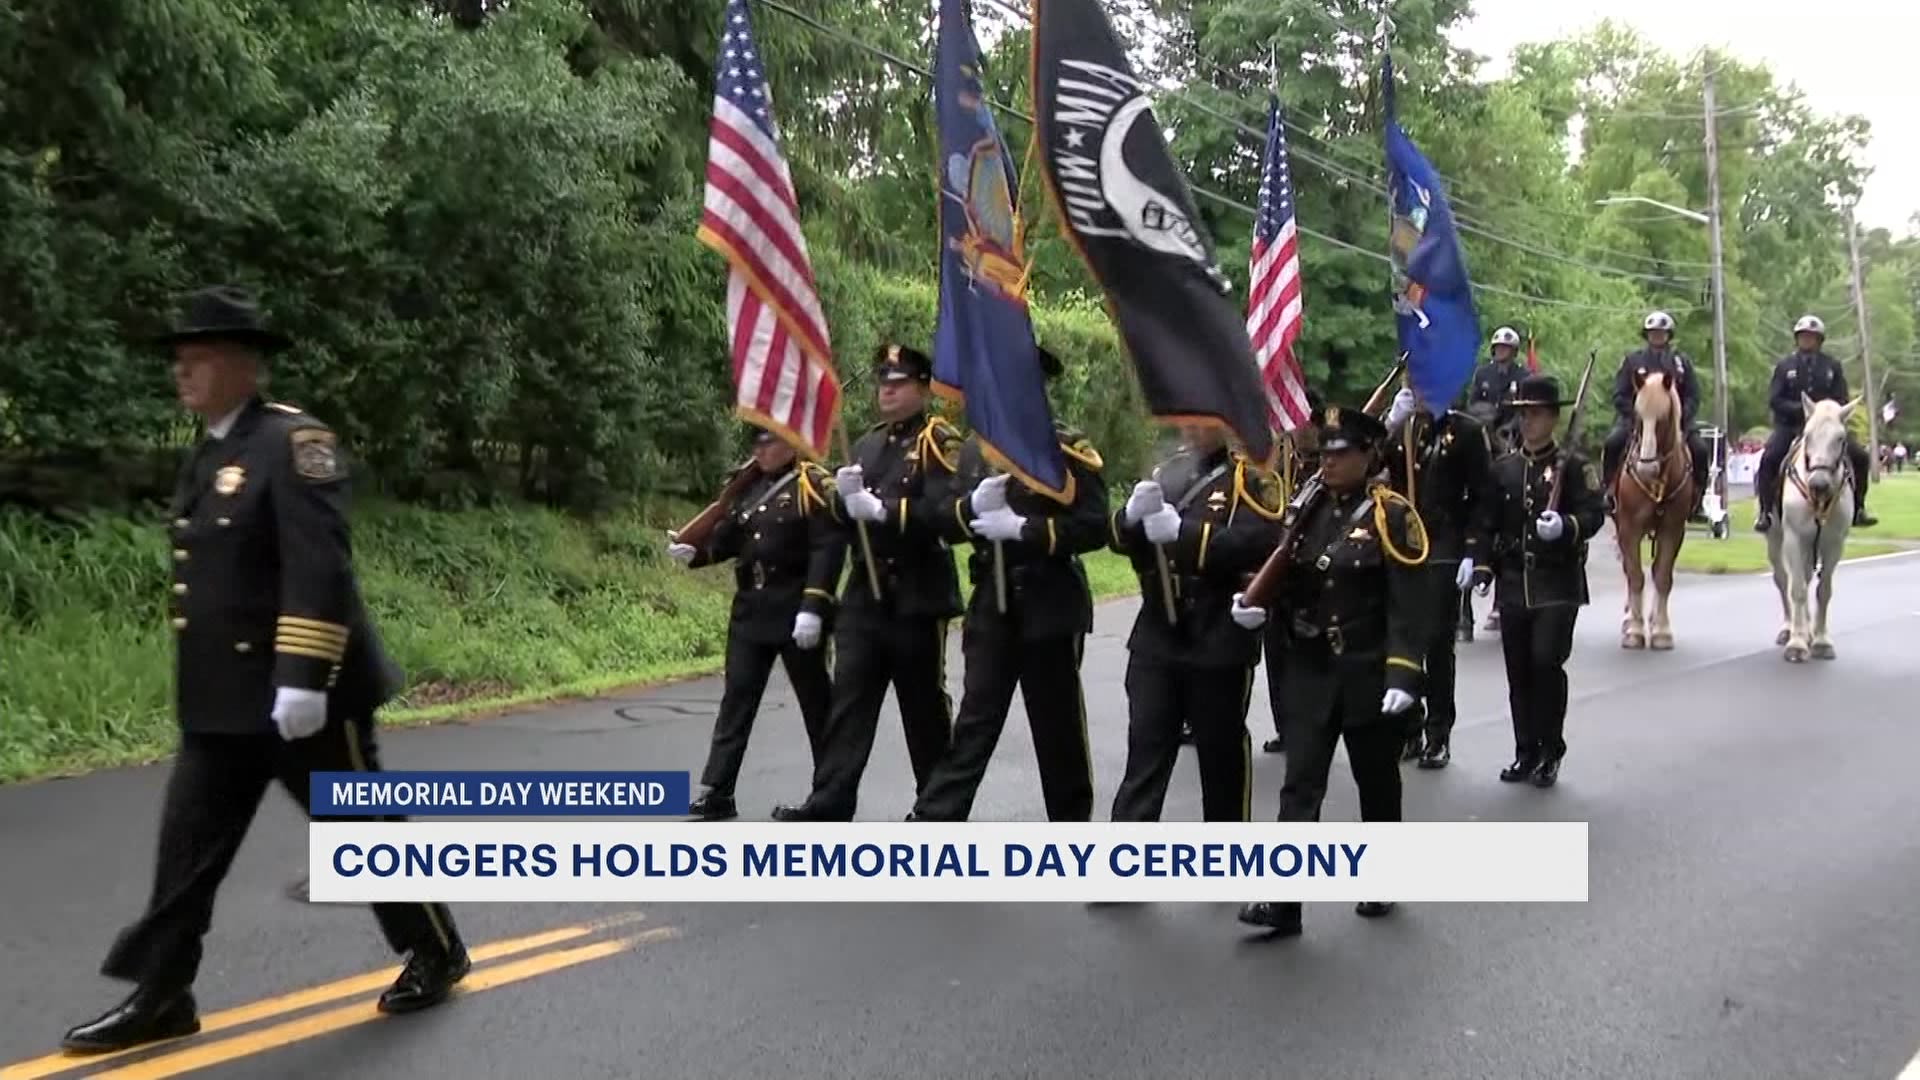 Congers Community kicks off Memorial Day remembrance ceremonies with